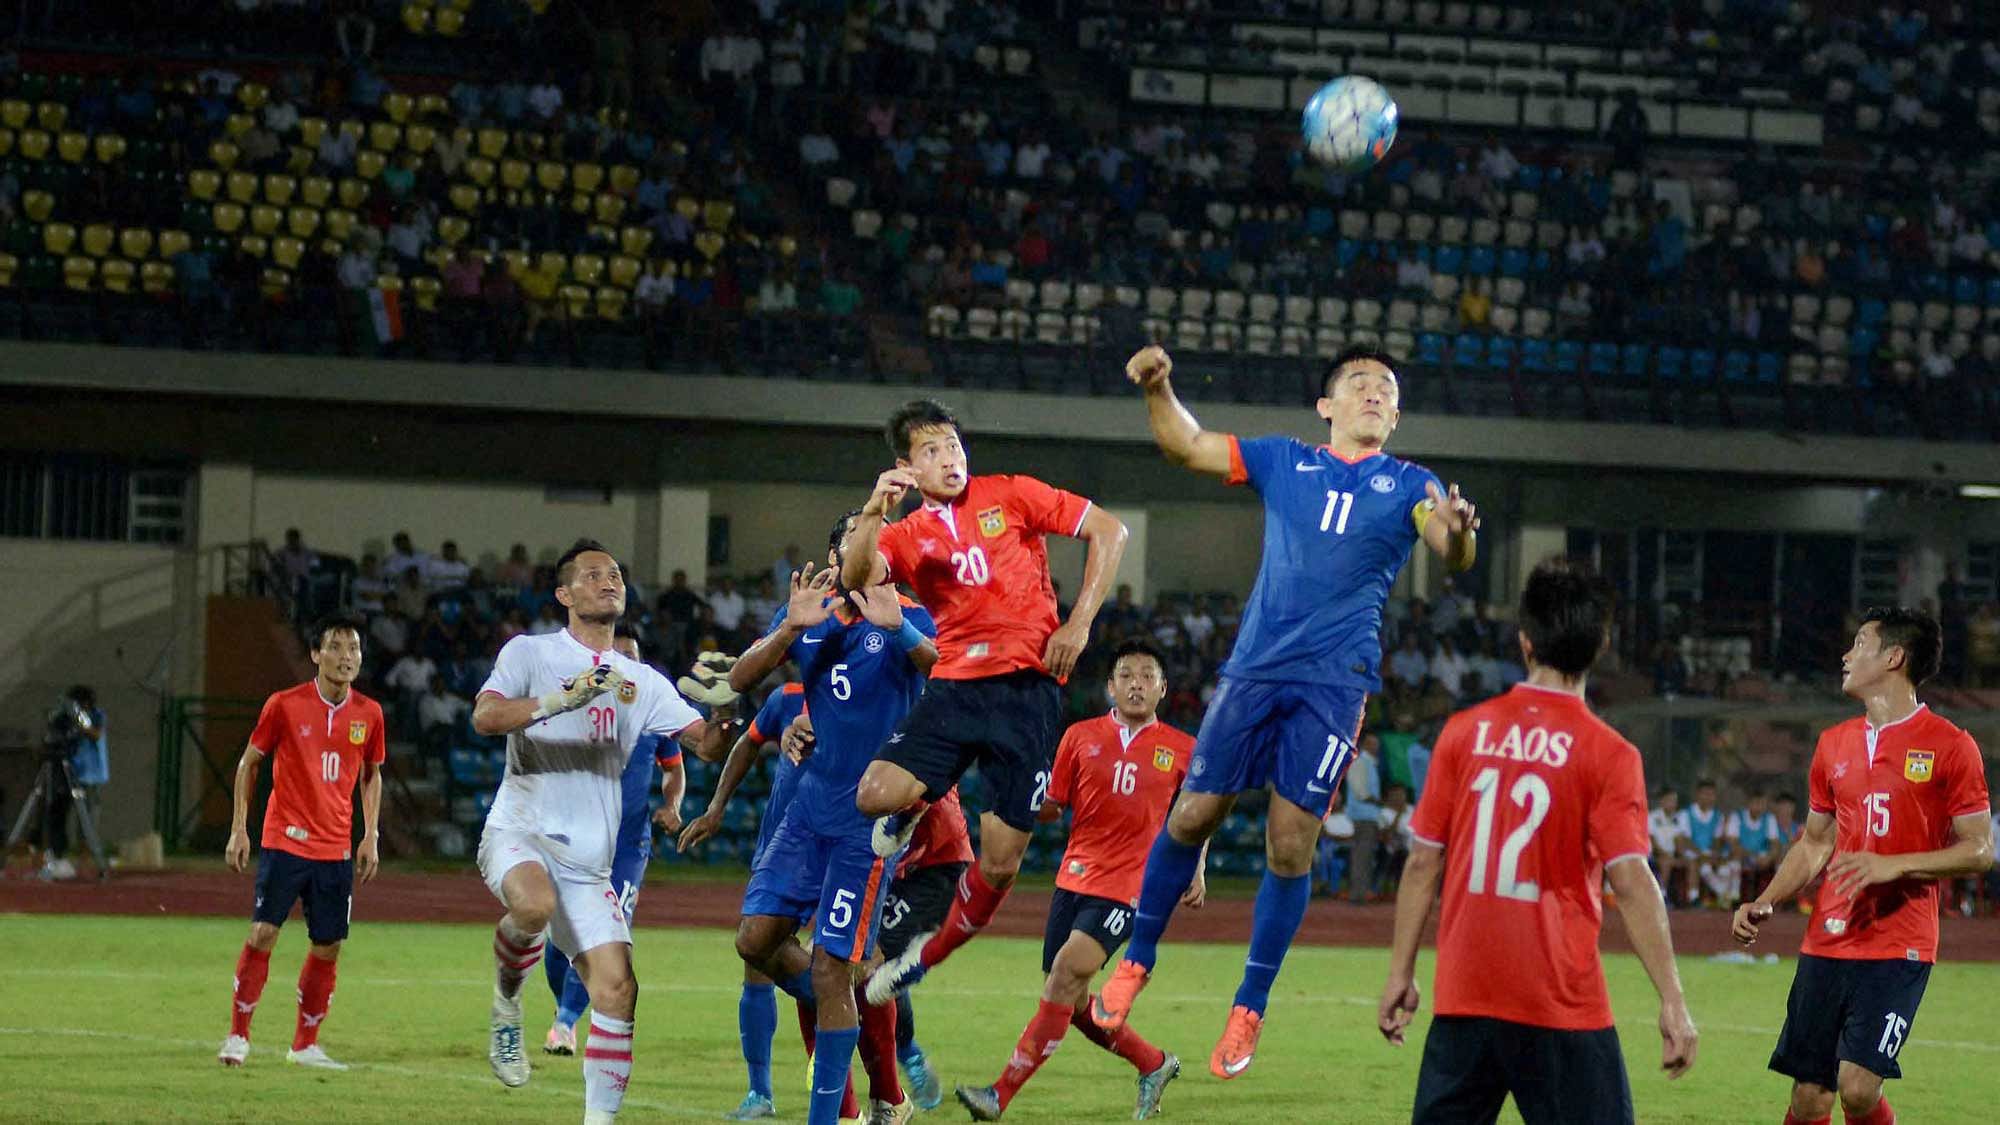 Guwahati : Players in action the match between India (Blue) and Laos (red) at AFC Asian Cup UAE 2019 (Qualifiers Pay-off Round) at Indira Gandhi Athletic Stadium in Guwahati (Photo: PTI)